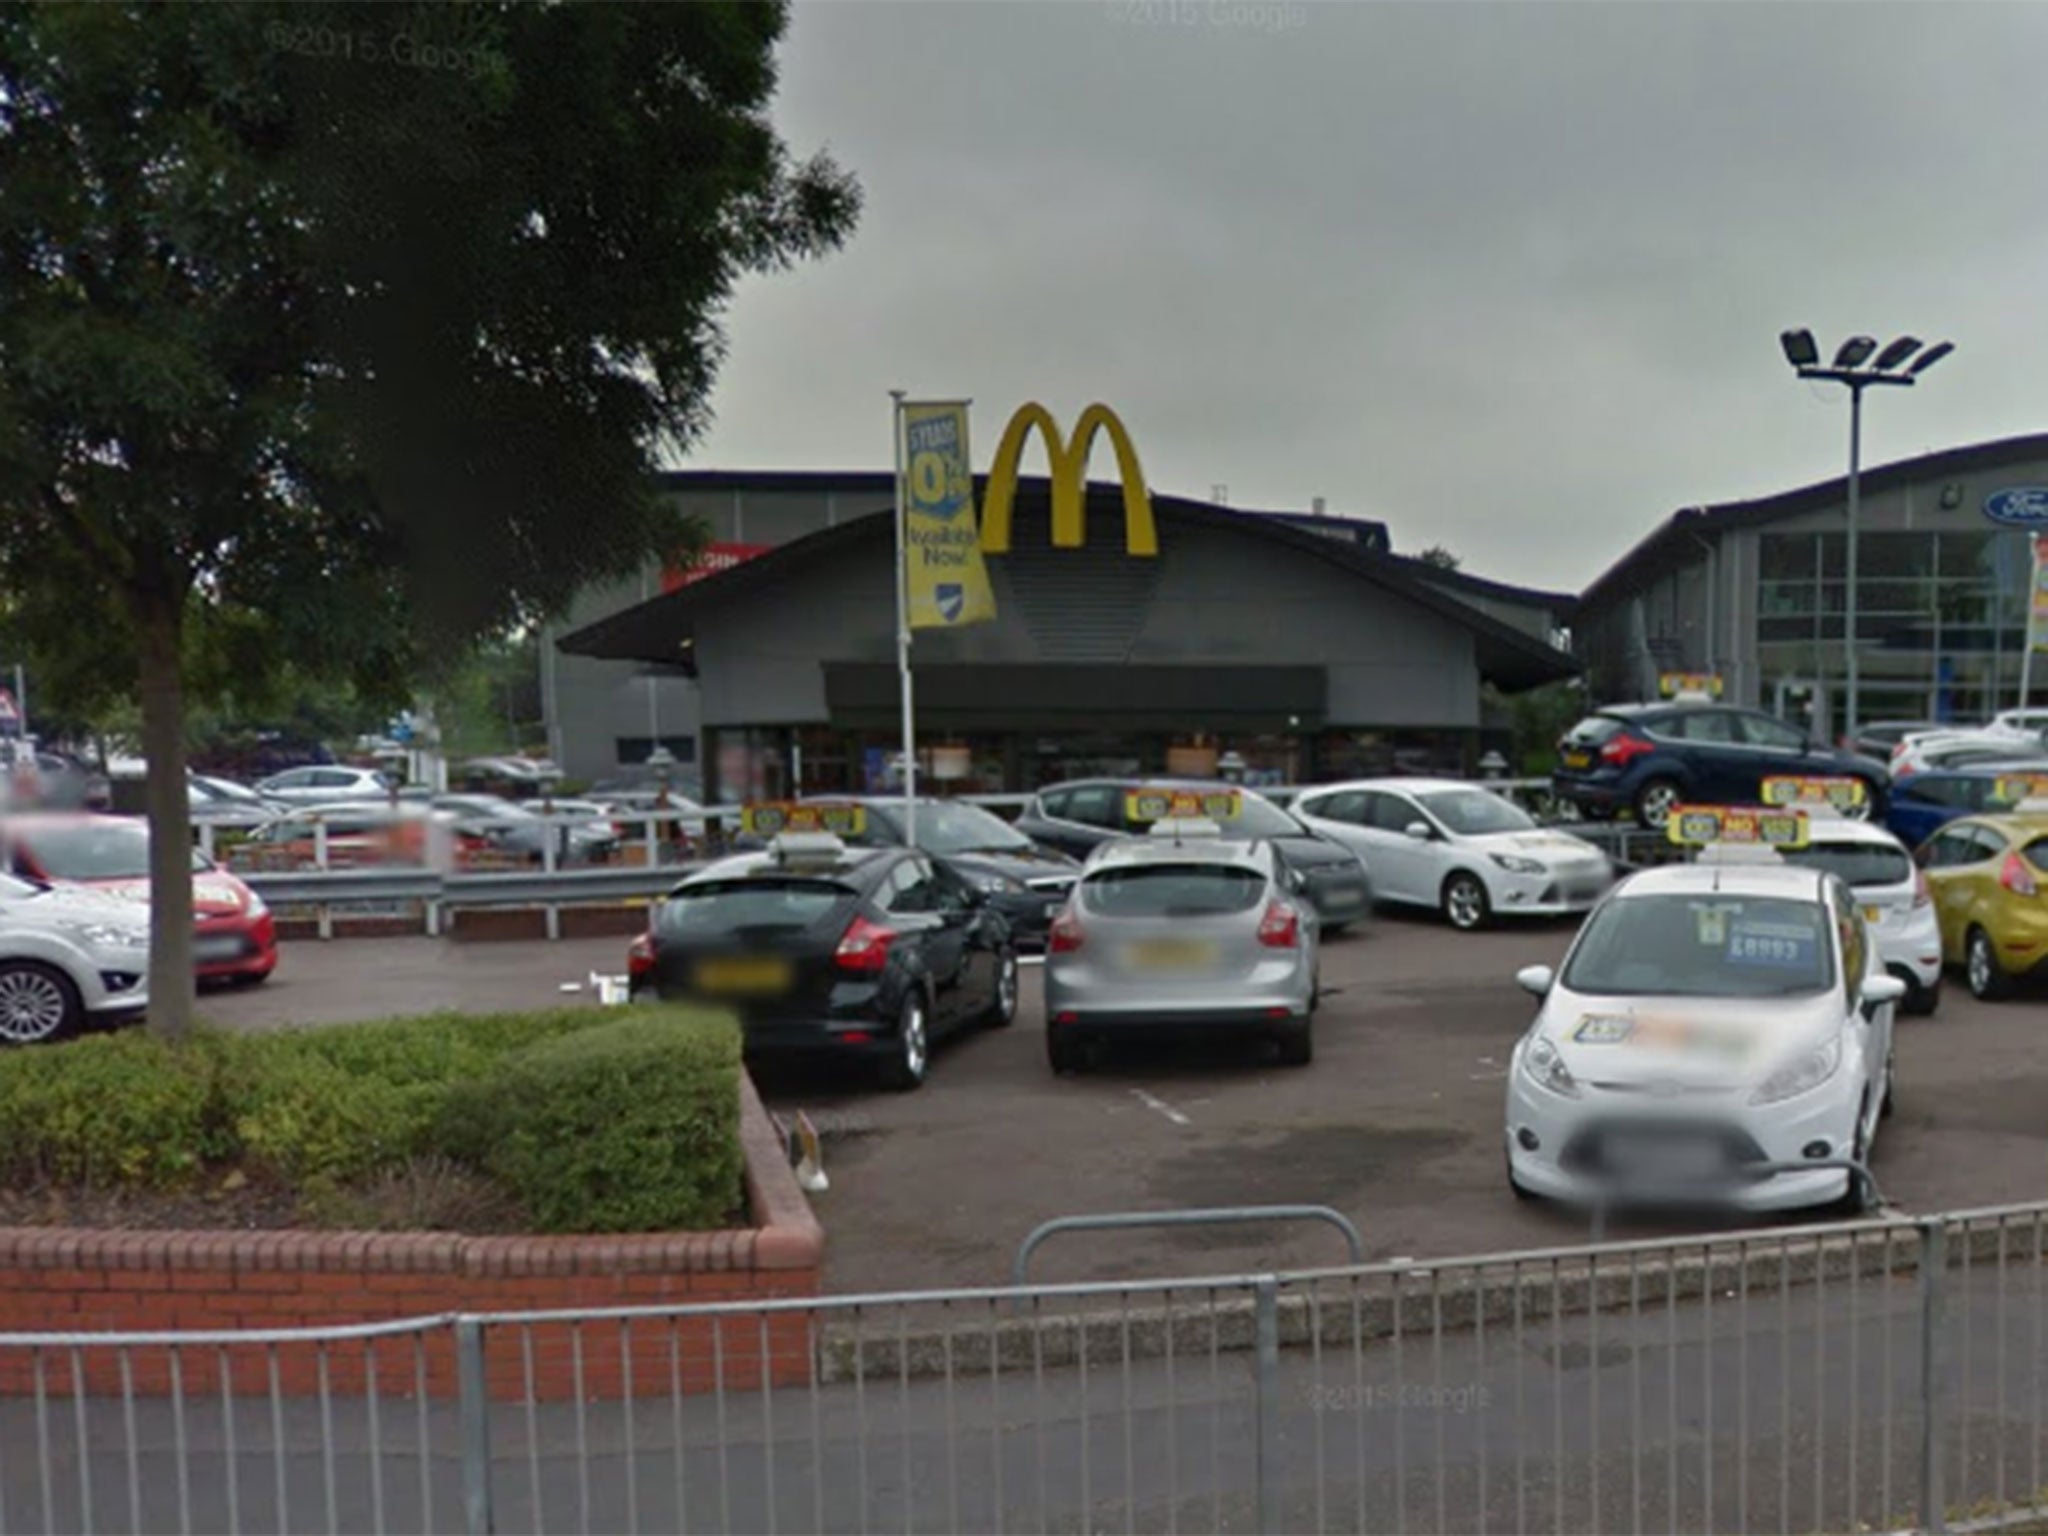 The McDonald's was evacuated while police investigated the source of the gas